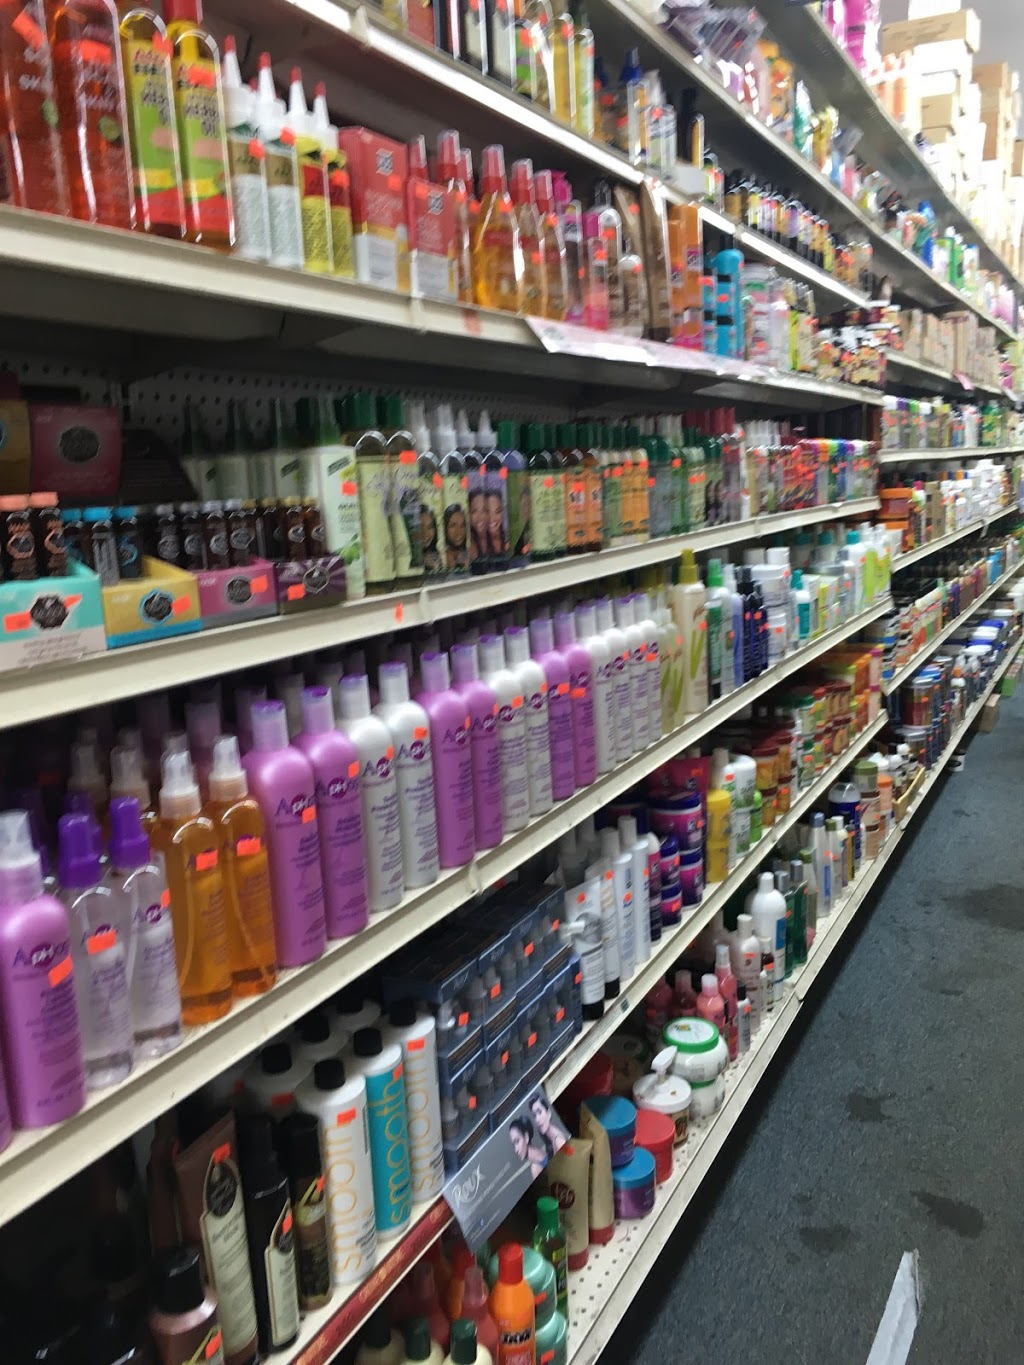 Discount Beauty Supply | 210 S State Rd 7, Hollywood, FL 33023, USA | Phone: (954) 966-7989